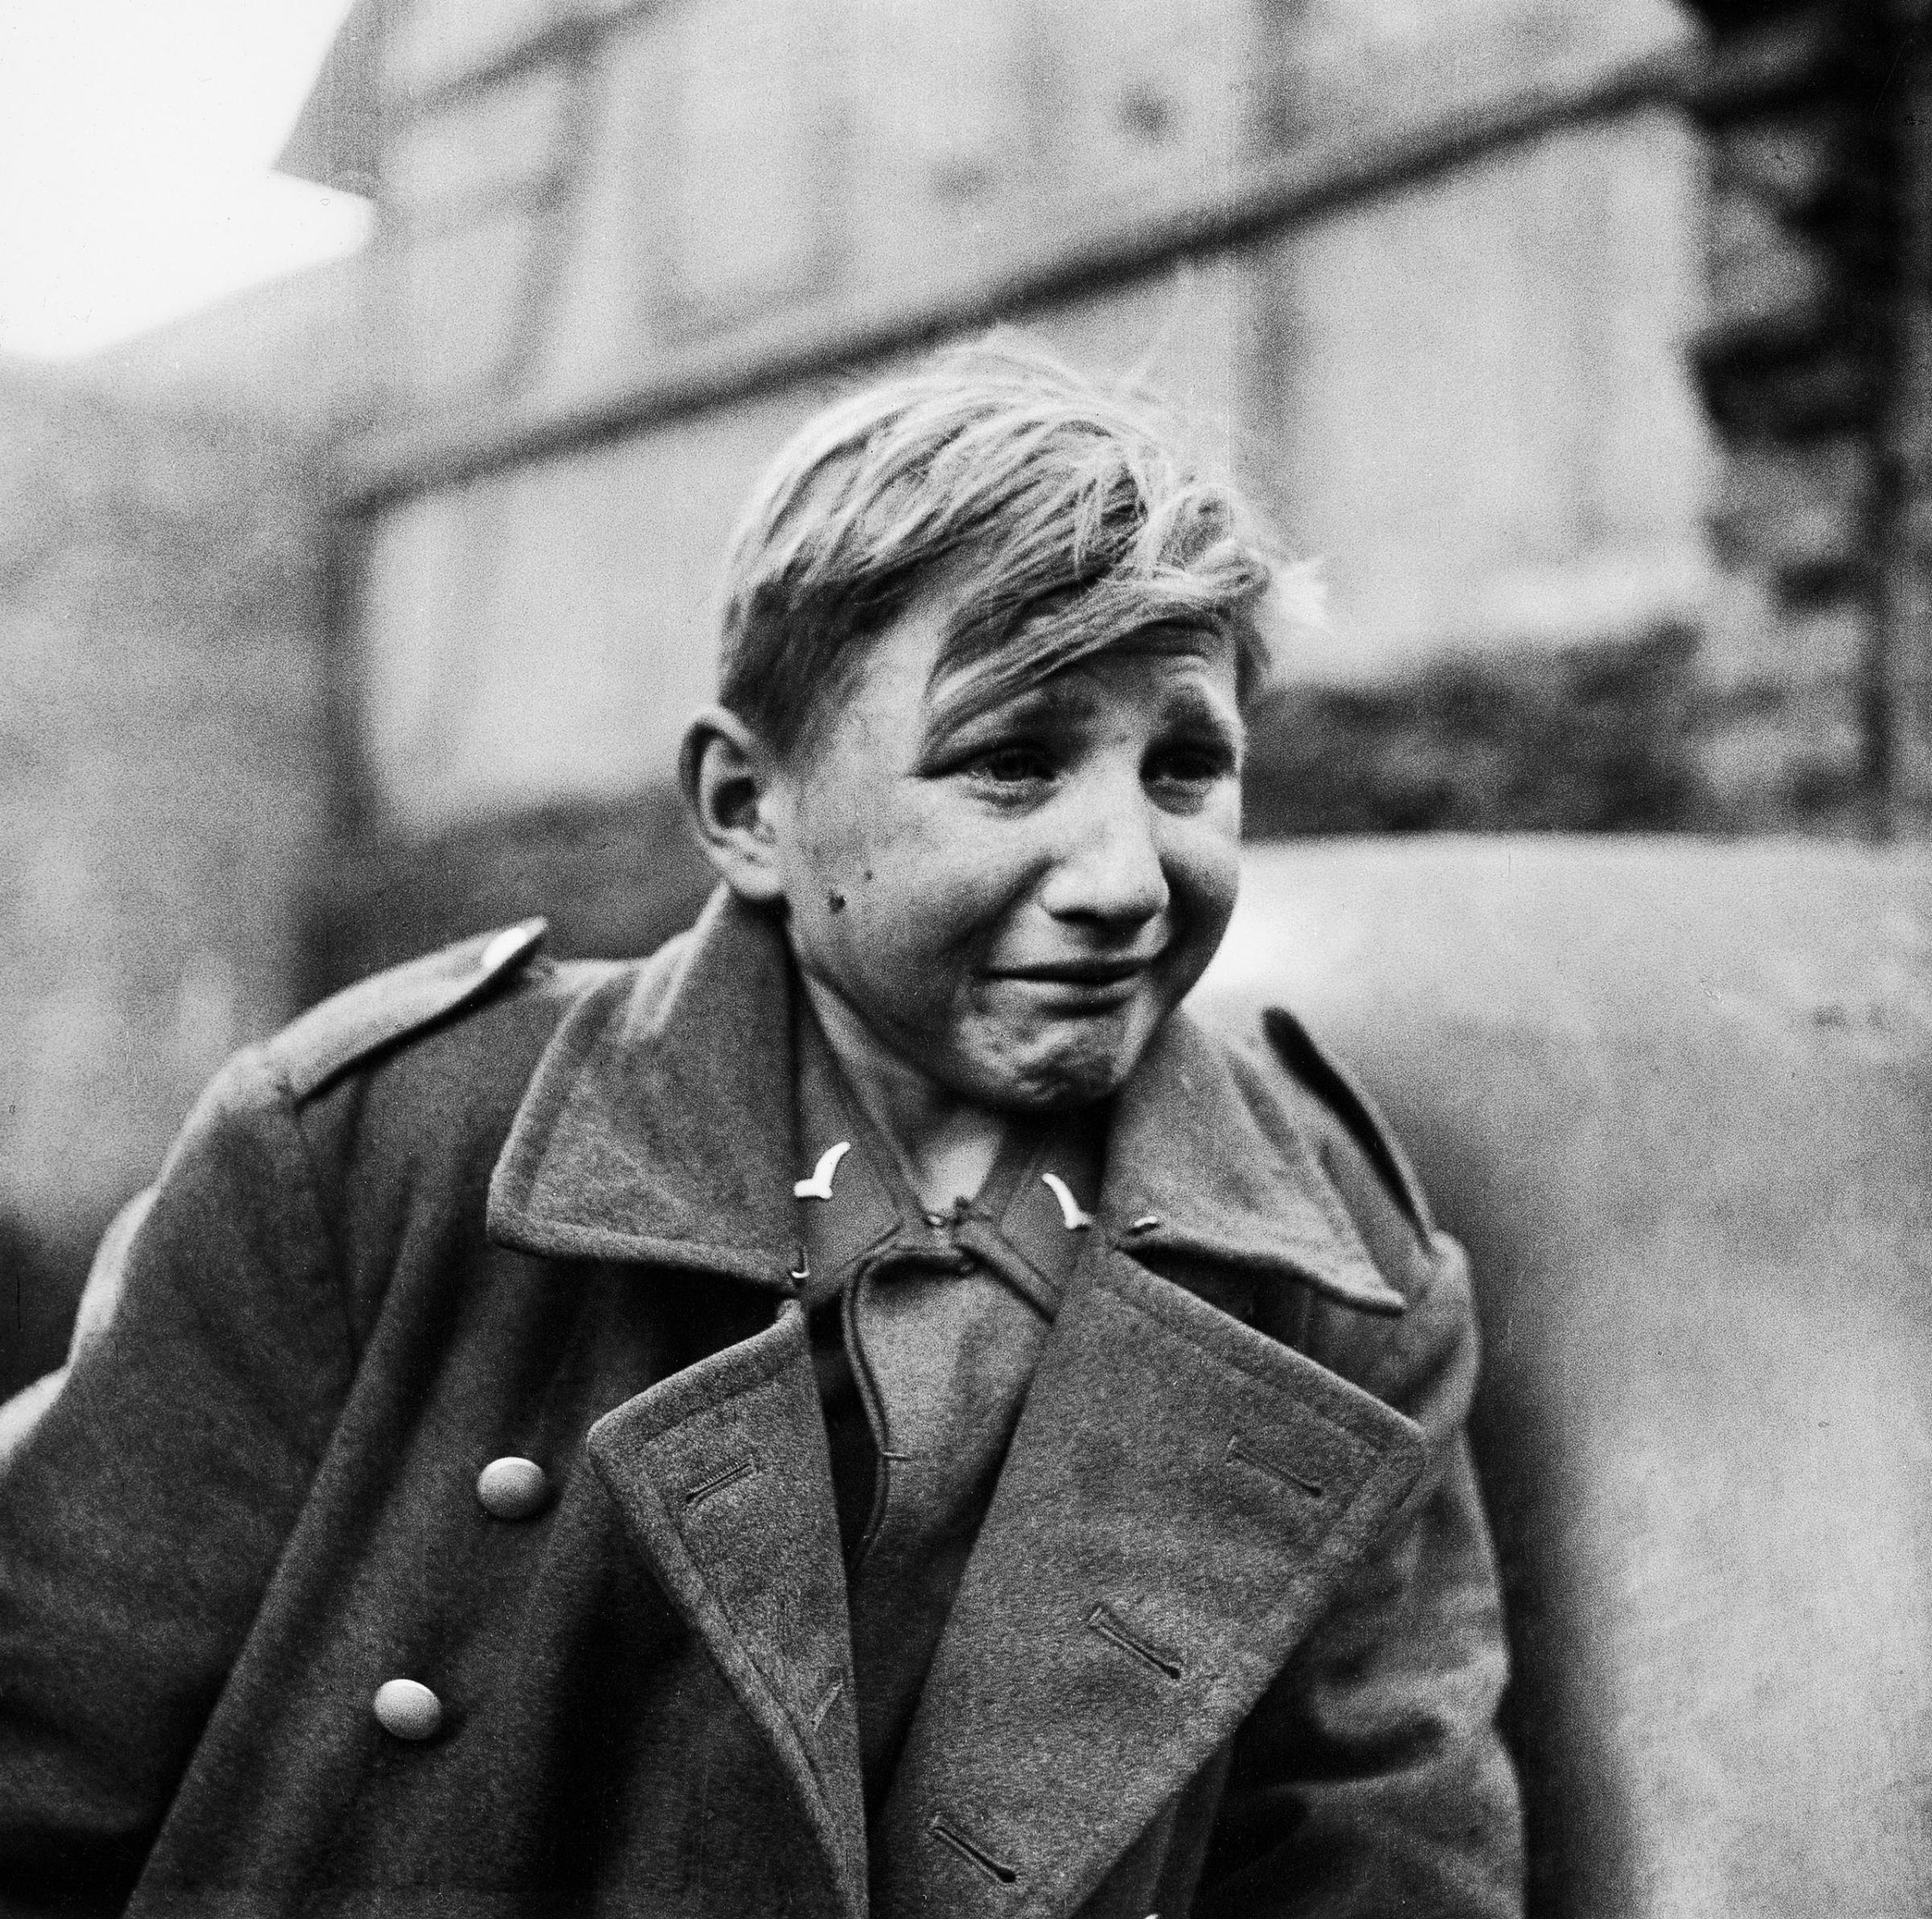 Fearful 15-year-old German Luftwaffe anti-aircraft crew member crying after being taken prisoner by American forces during the drive into Germany.